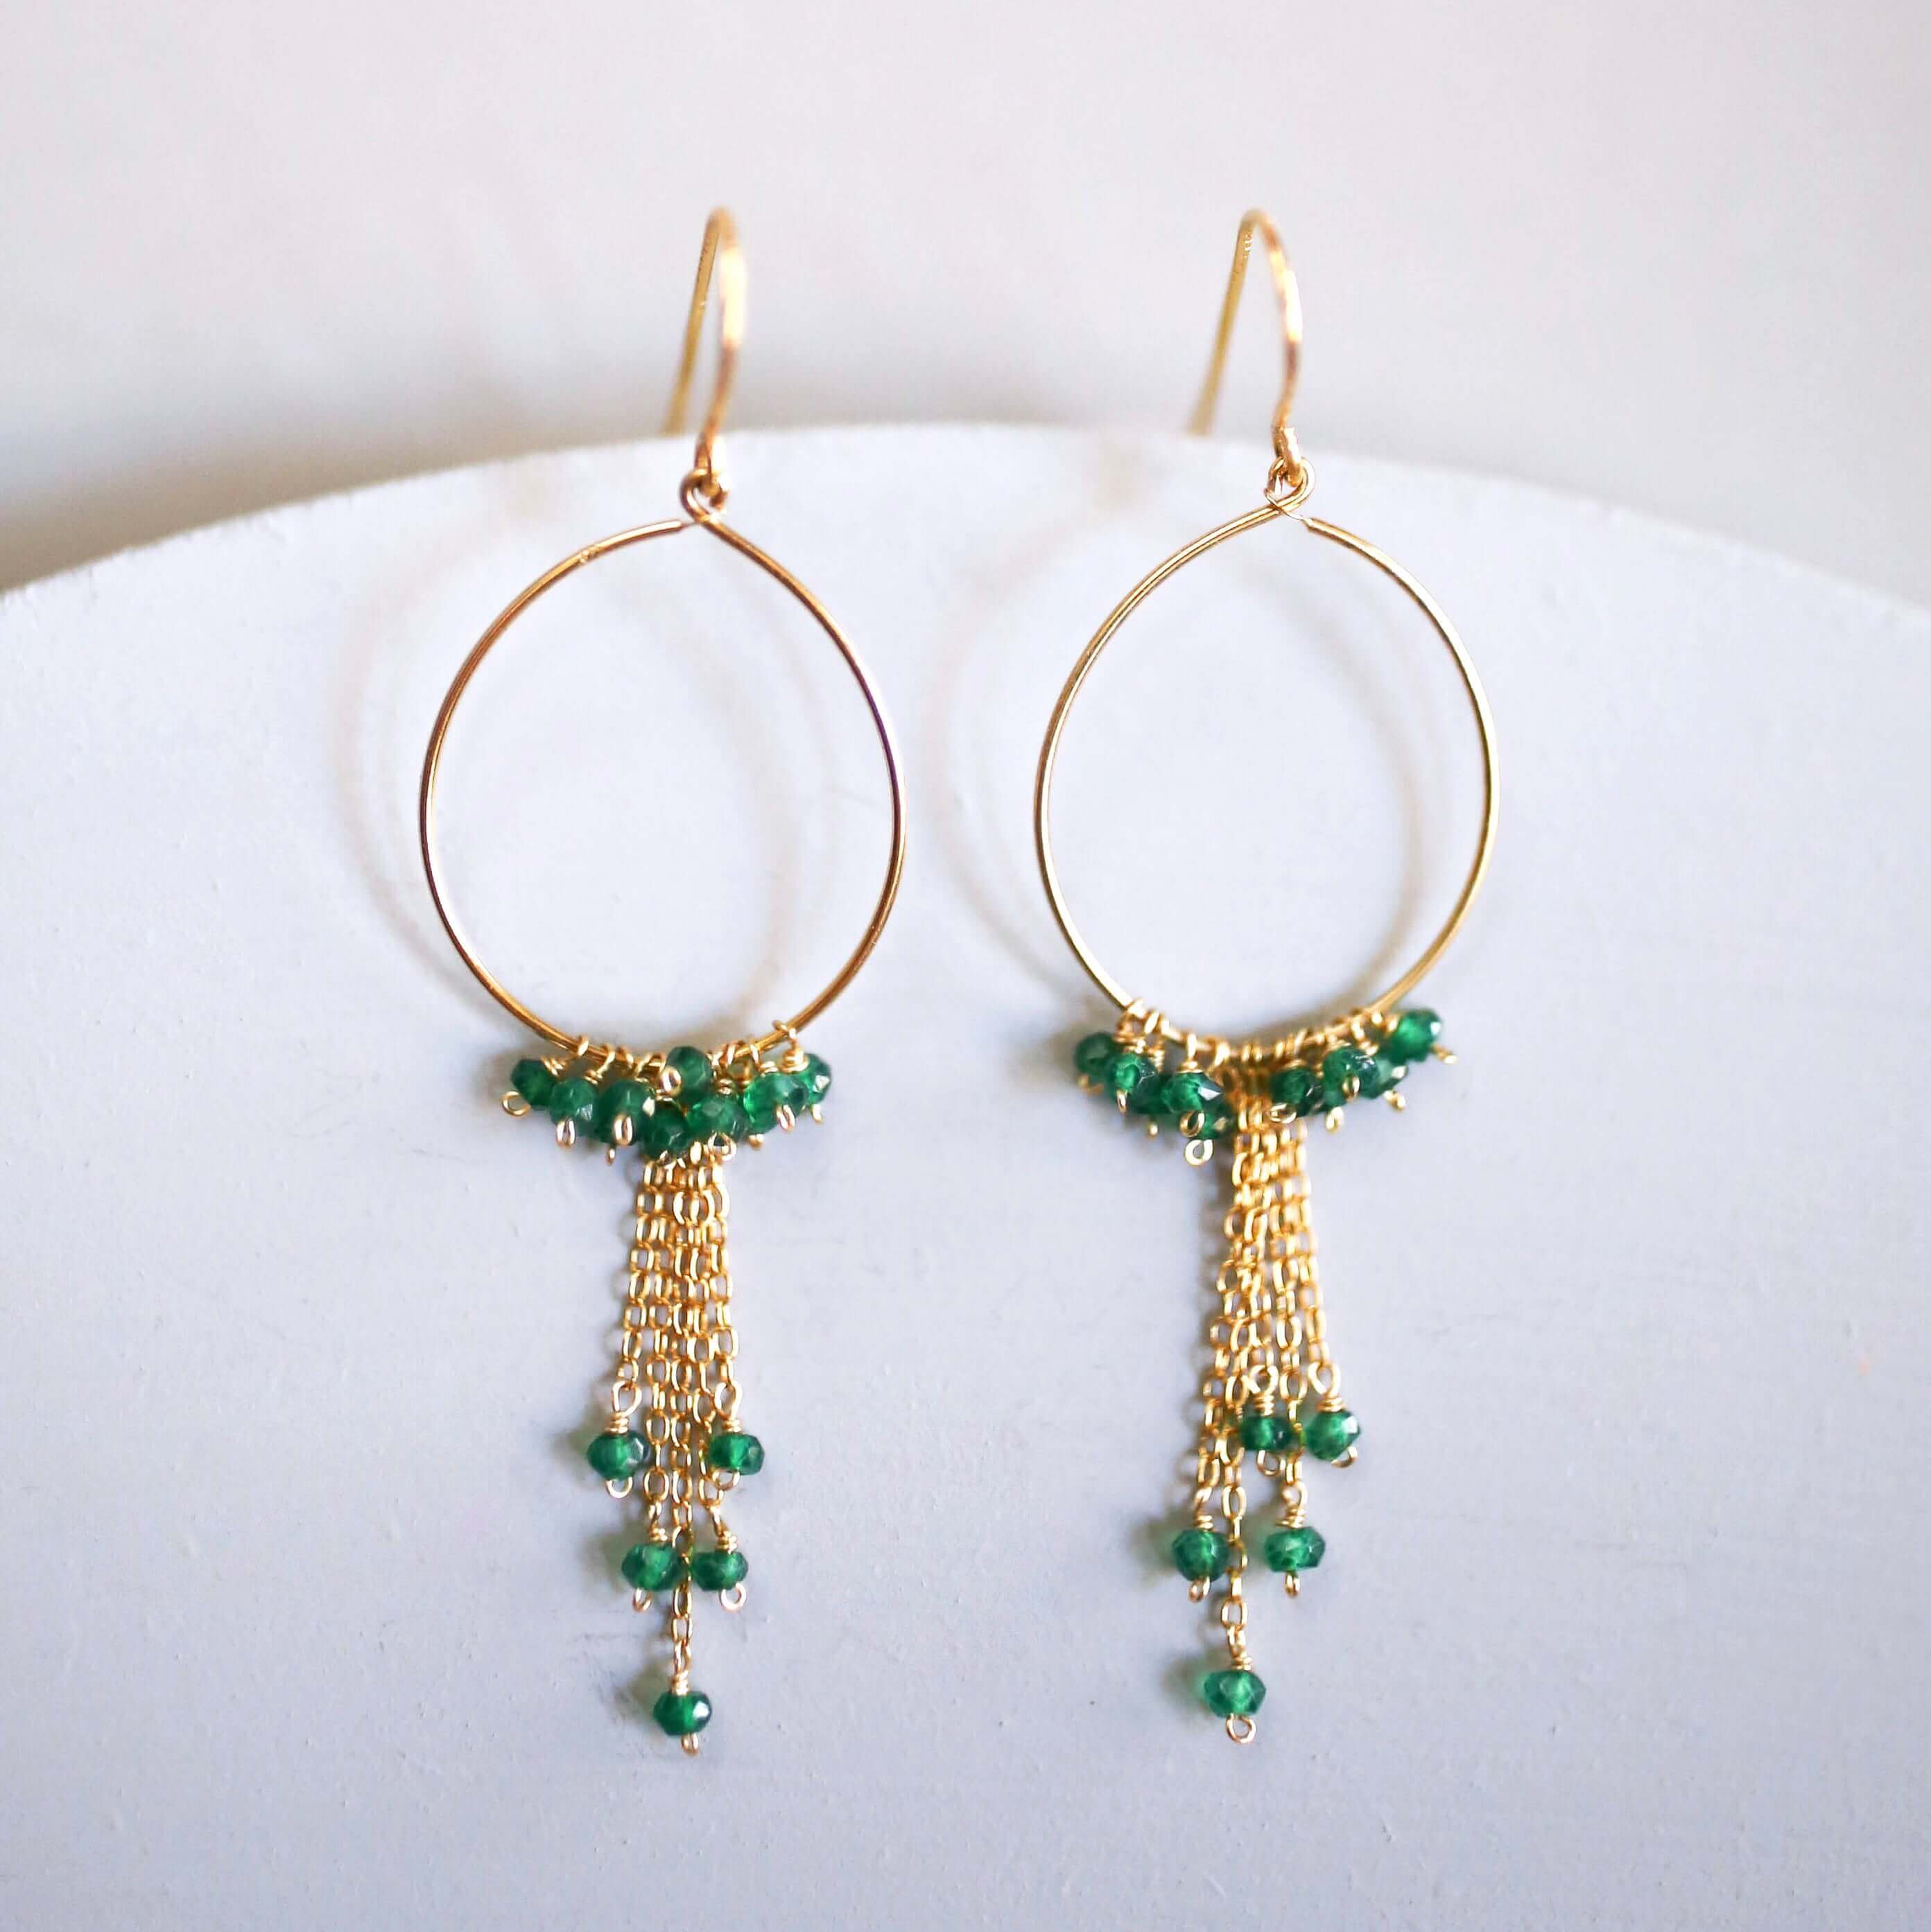 Gold Hoop Earrings with Delicate Chains and Green Apatite Stones